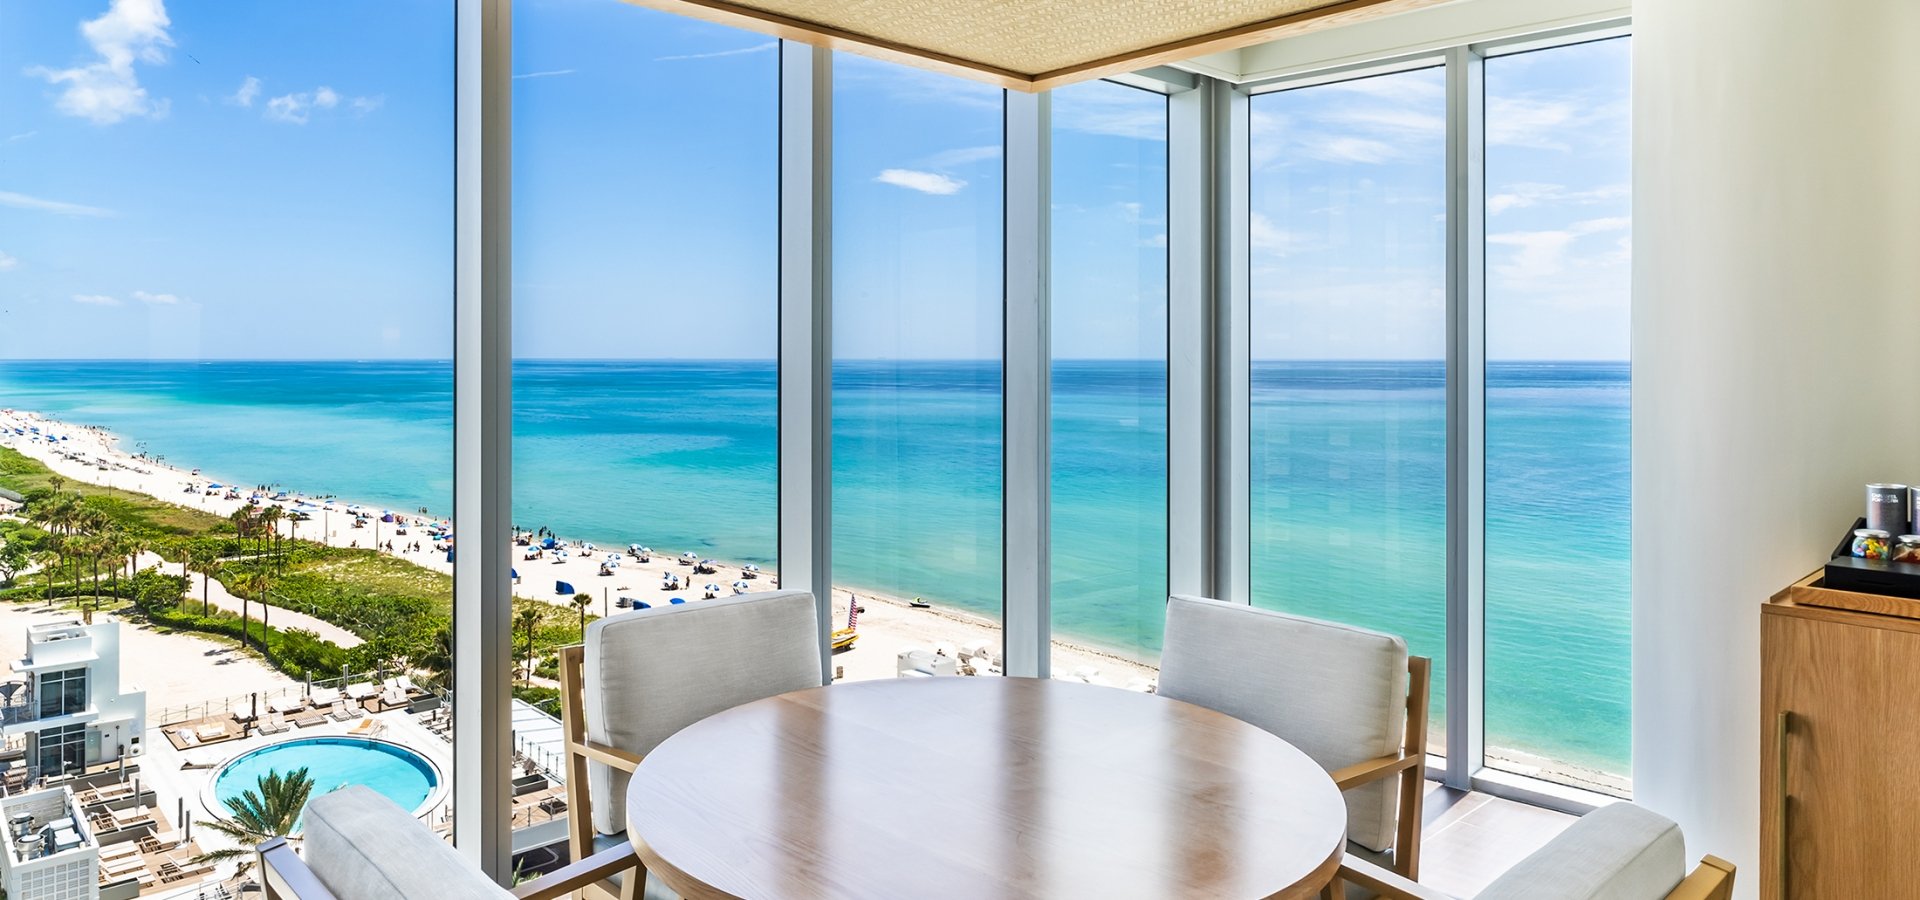 A view of the beach from a room at Eden Roc